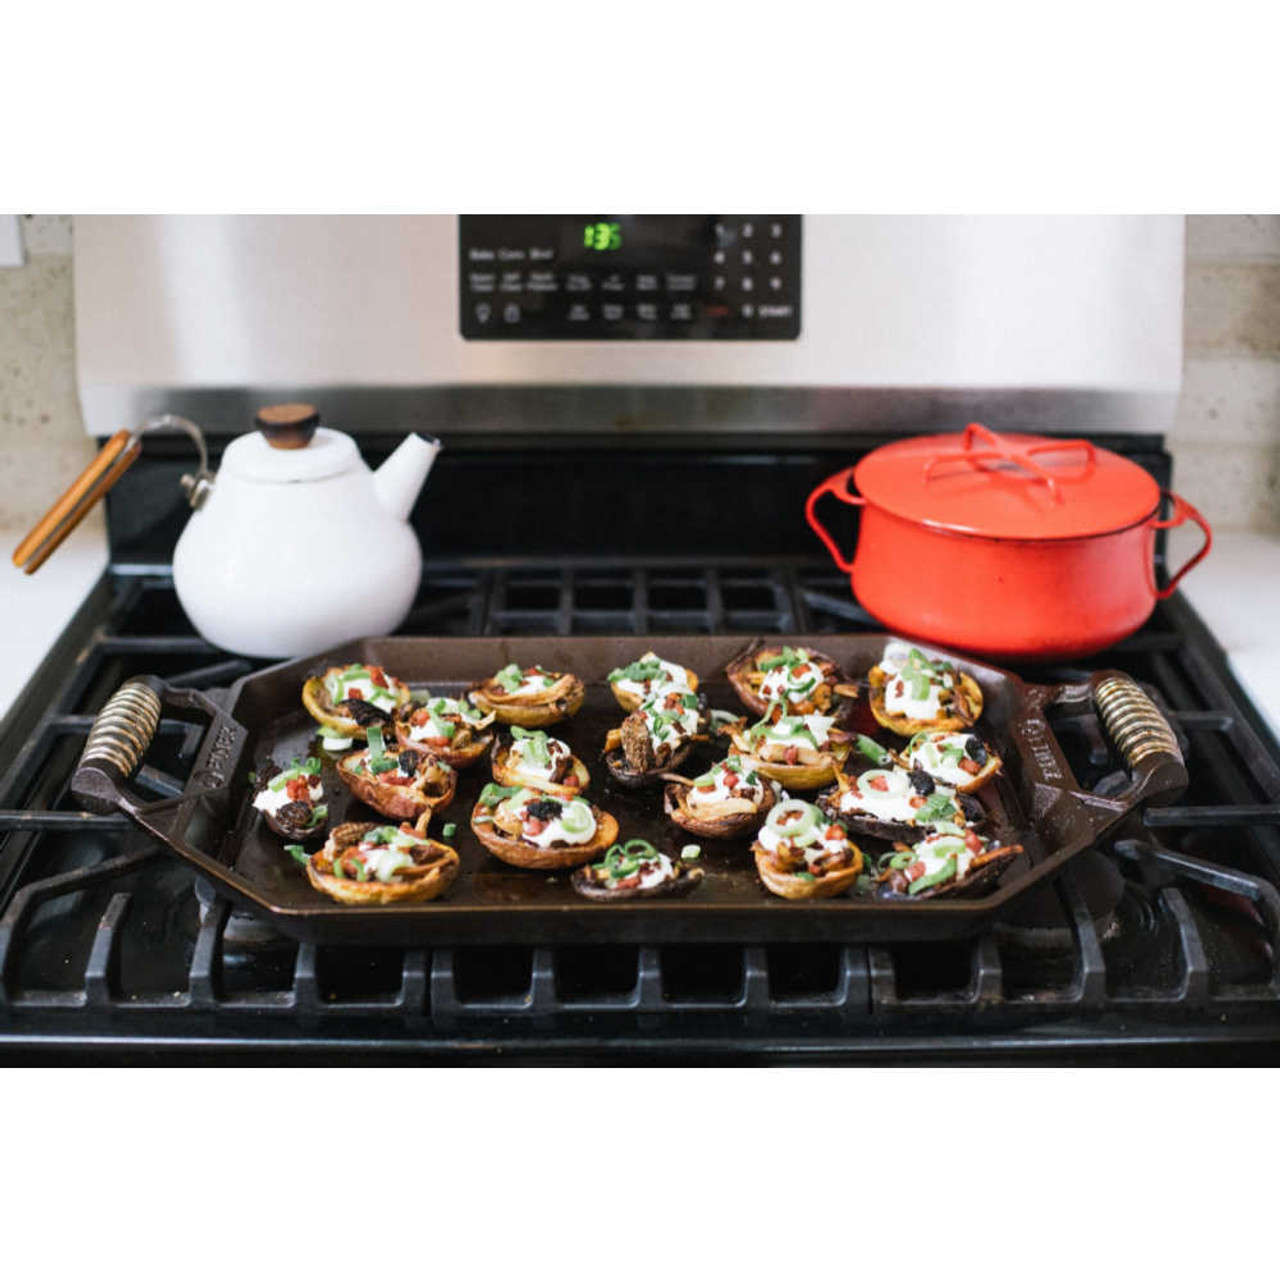 https://cdn11.bigcommerce.com/s-hccytny0od/images/stencil/1280x1280/products/4468/17674/Finex_Cast_Iron_Double_Burner_Griddle_4__40754.1642458268.jpg?c=2?imbypass=on